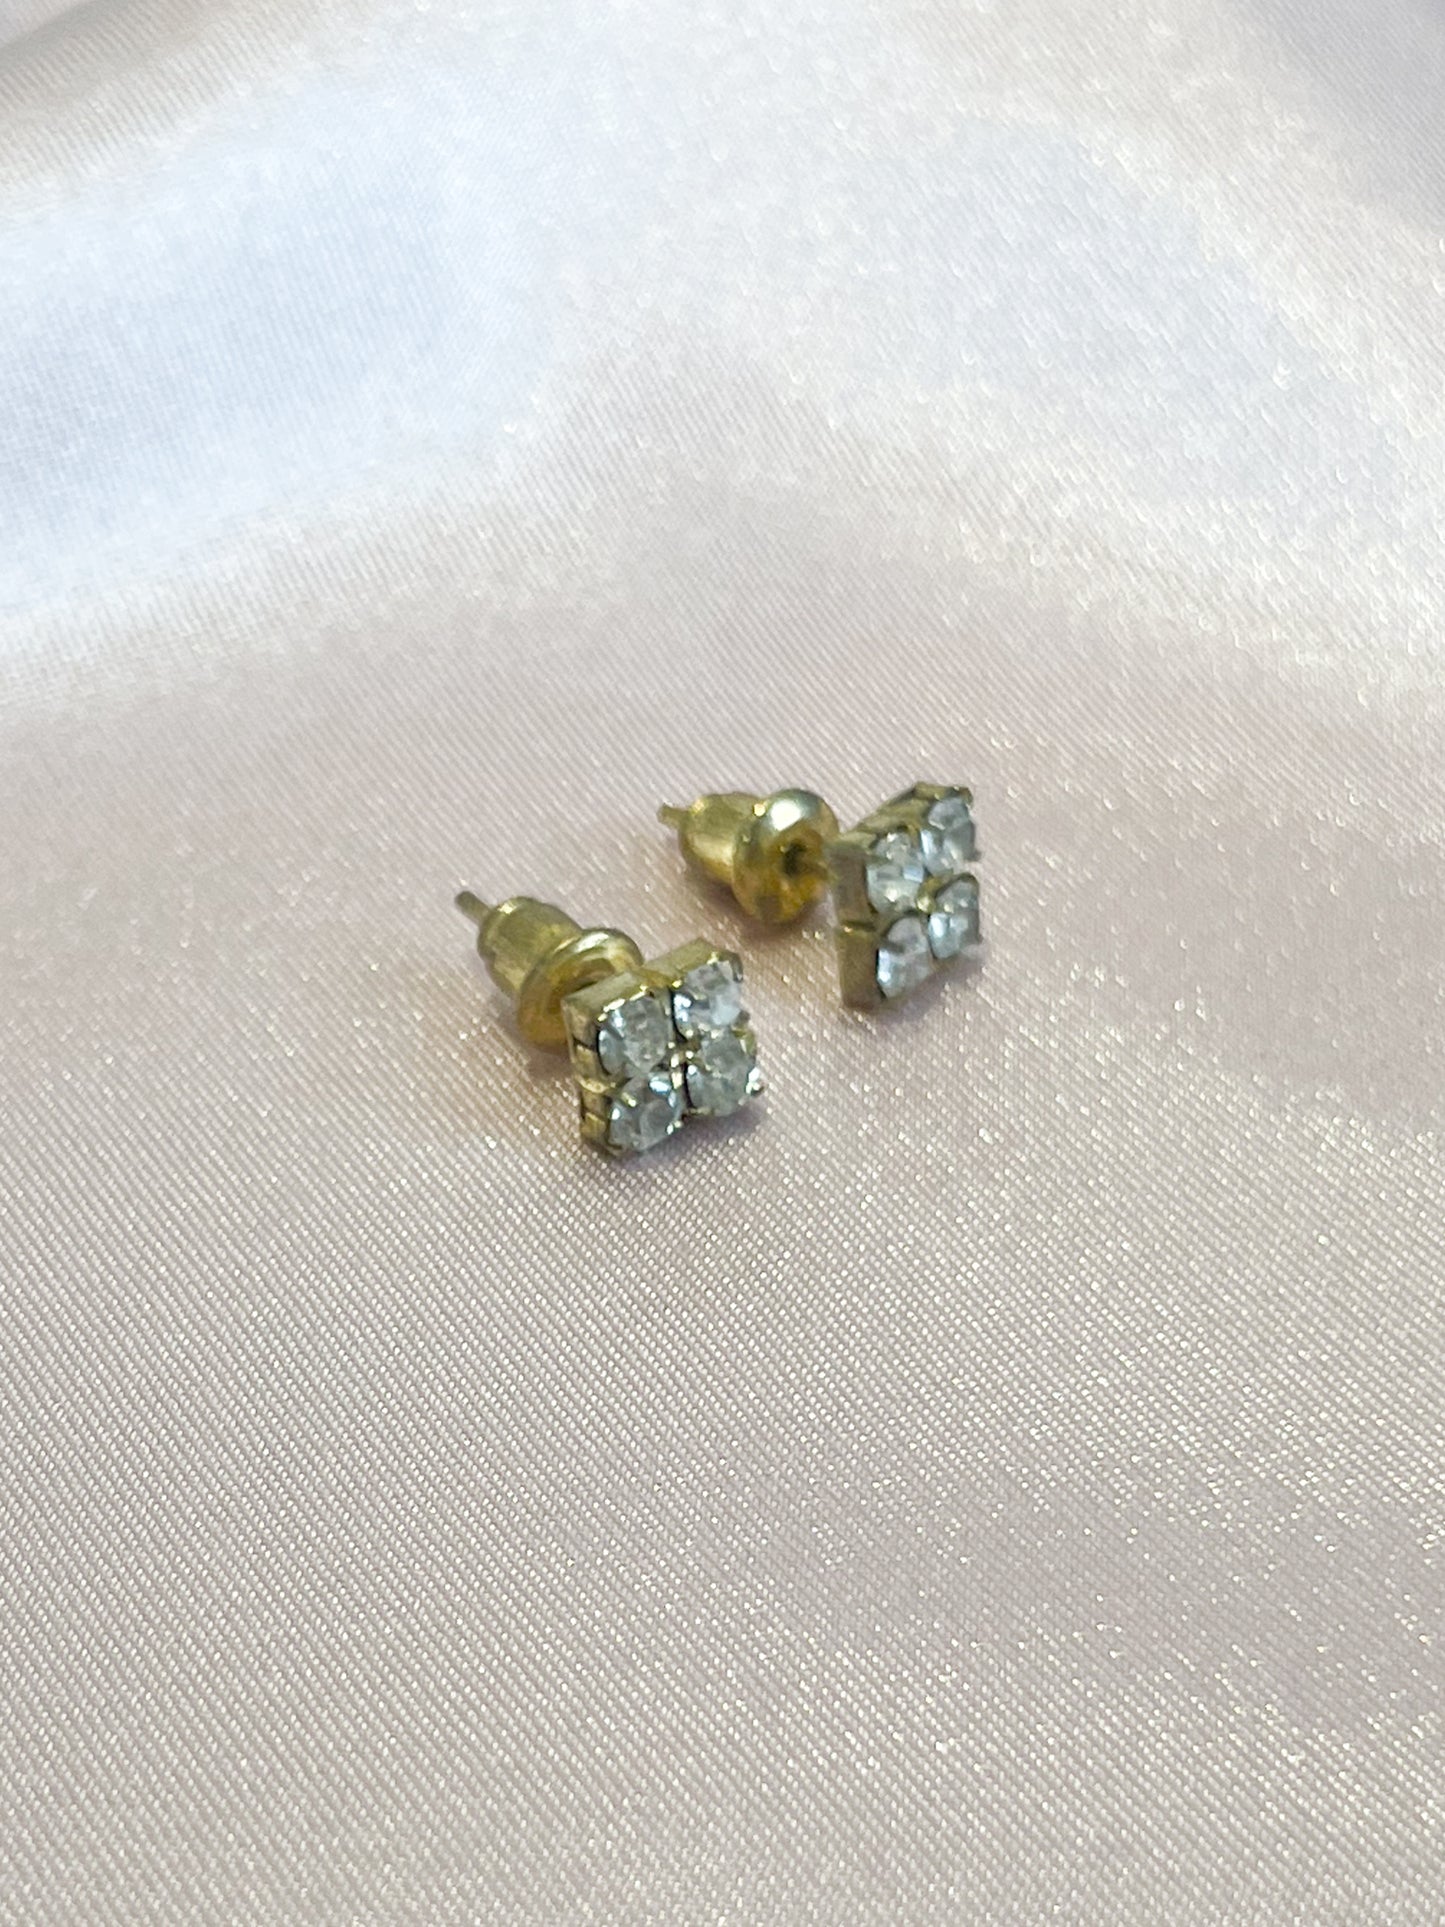 Gold Crystal Square Stud Earrings